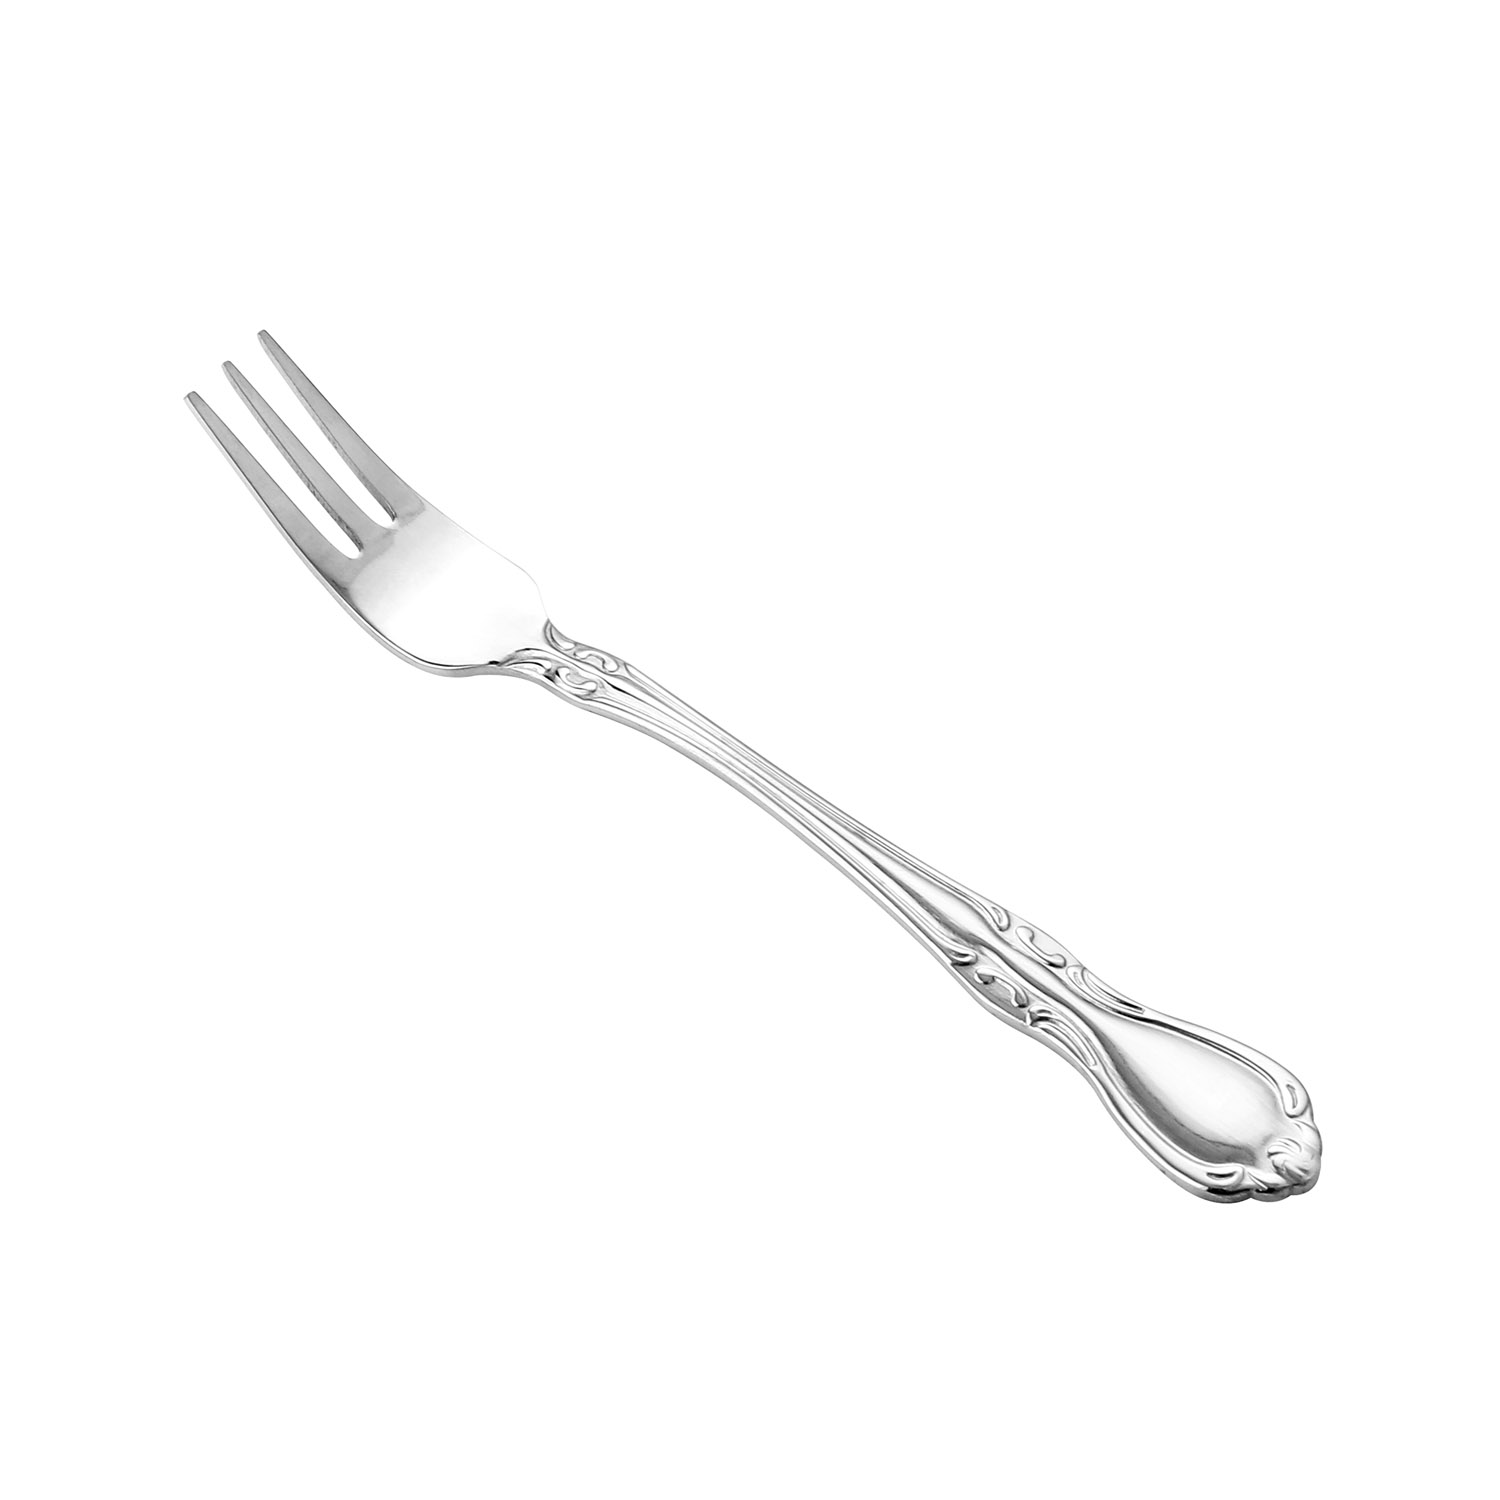 CAC China 8023-07 Glamour Oyster Fork, Extra Heavy Weight 18/8, 5 5/8" - 1 dozen